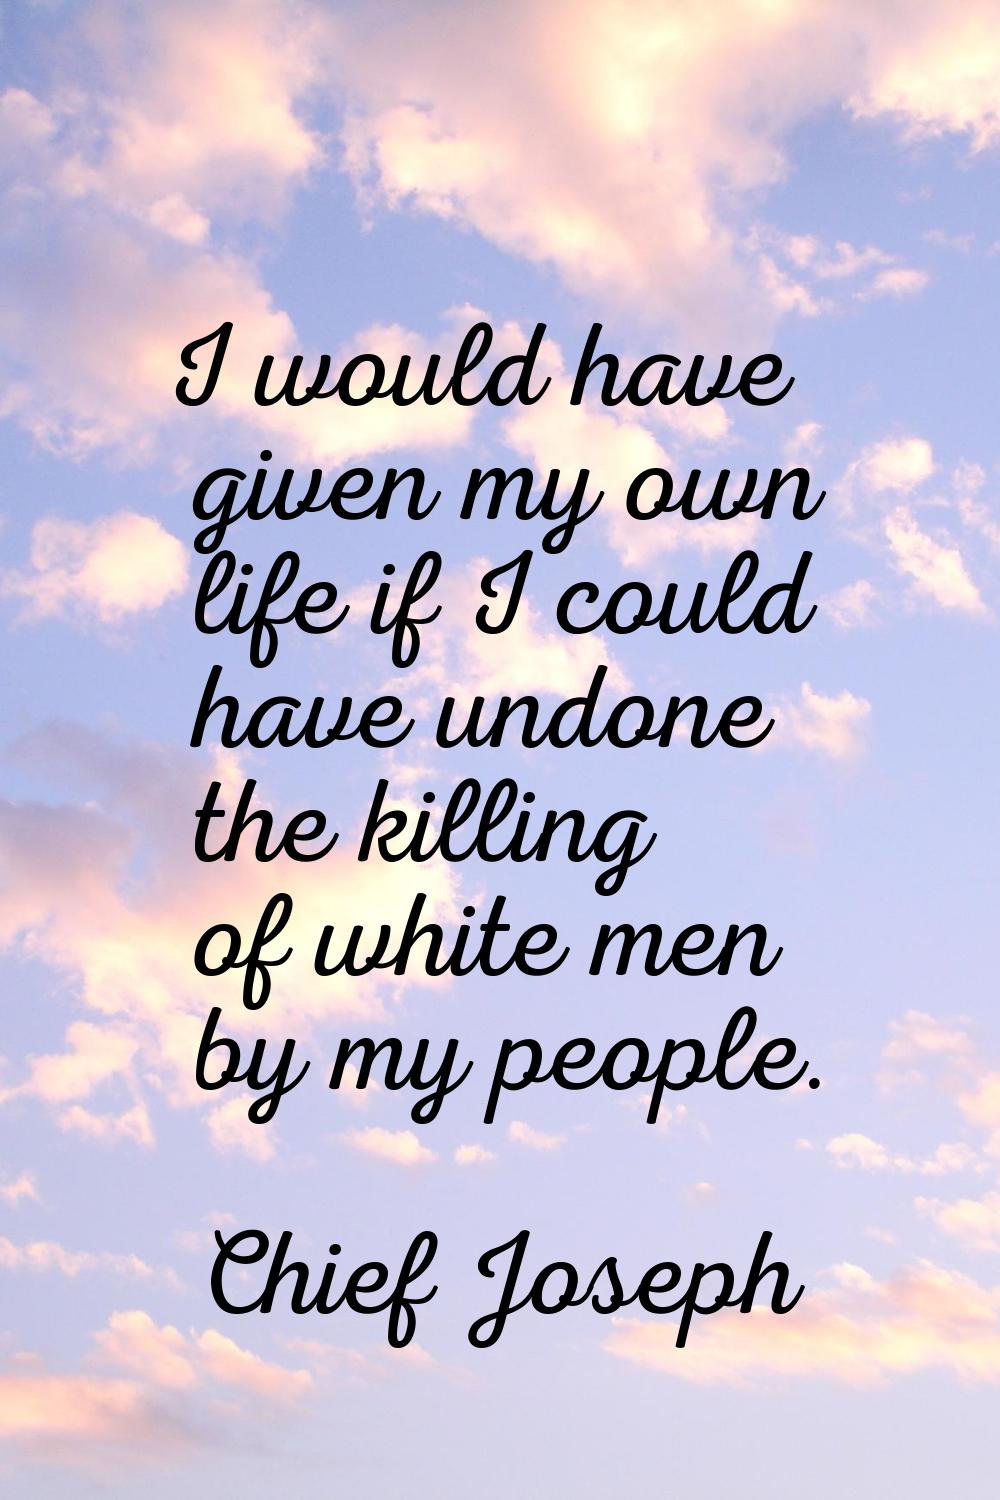 I would have given my own life if I could have undone the killing of white men by my people.